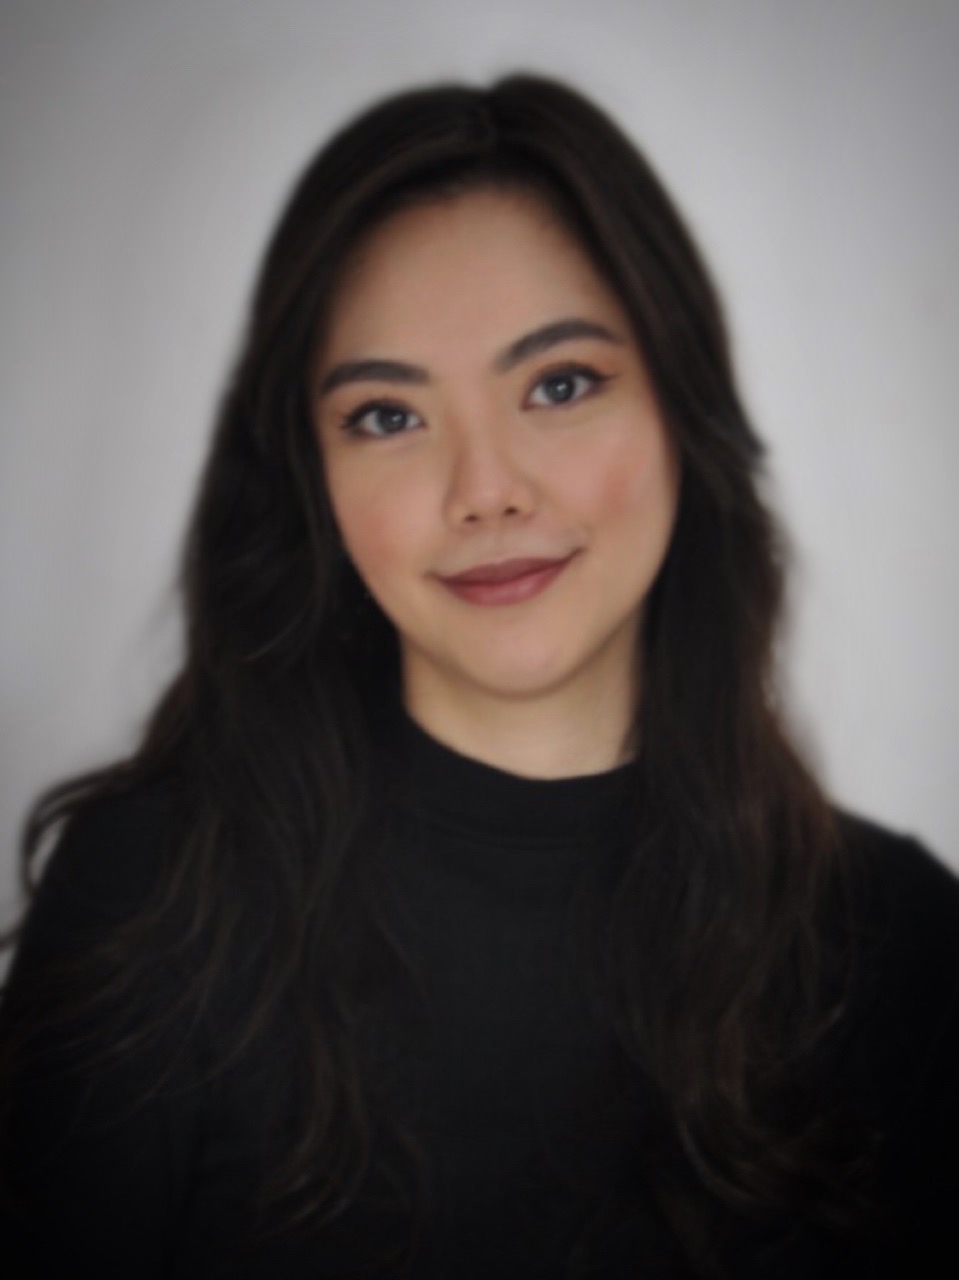 A headshot of smiling Christine Abigail Lee Tan who has wavy, long black hair, and is wearing a black turtleneck shirt.